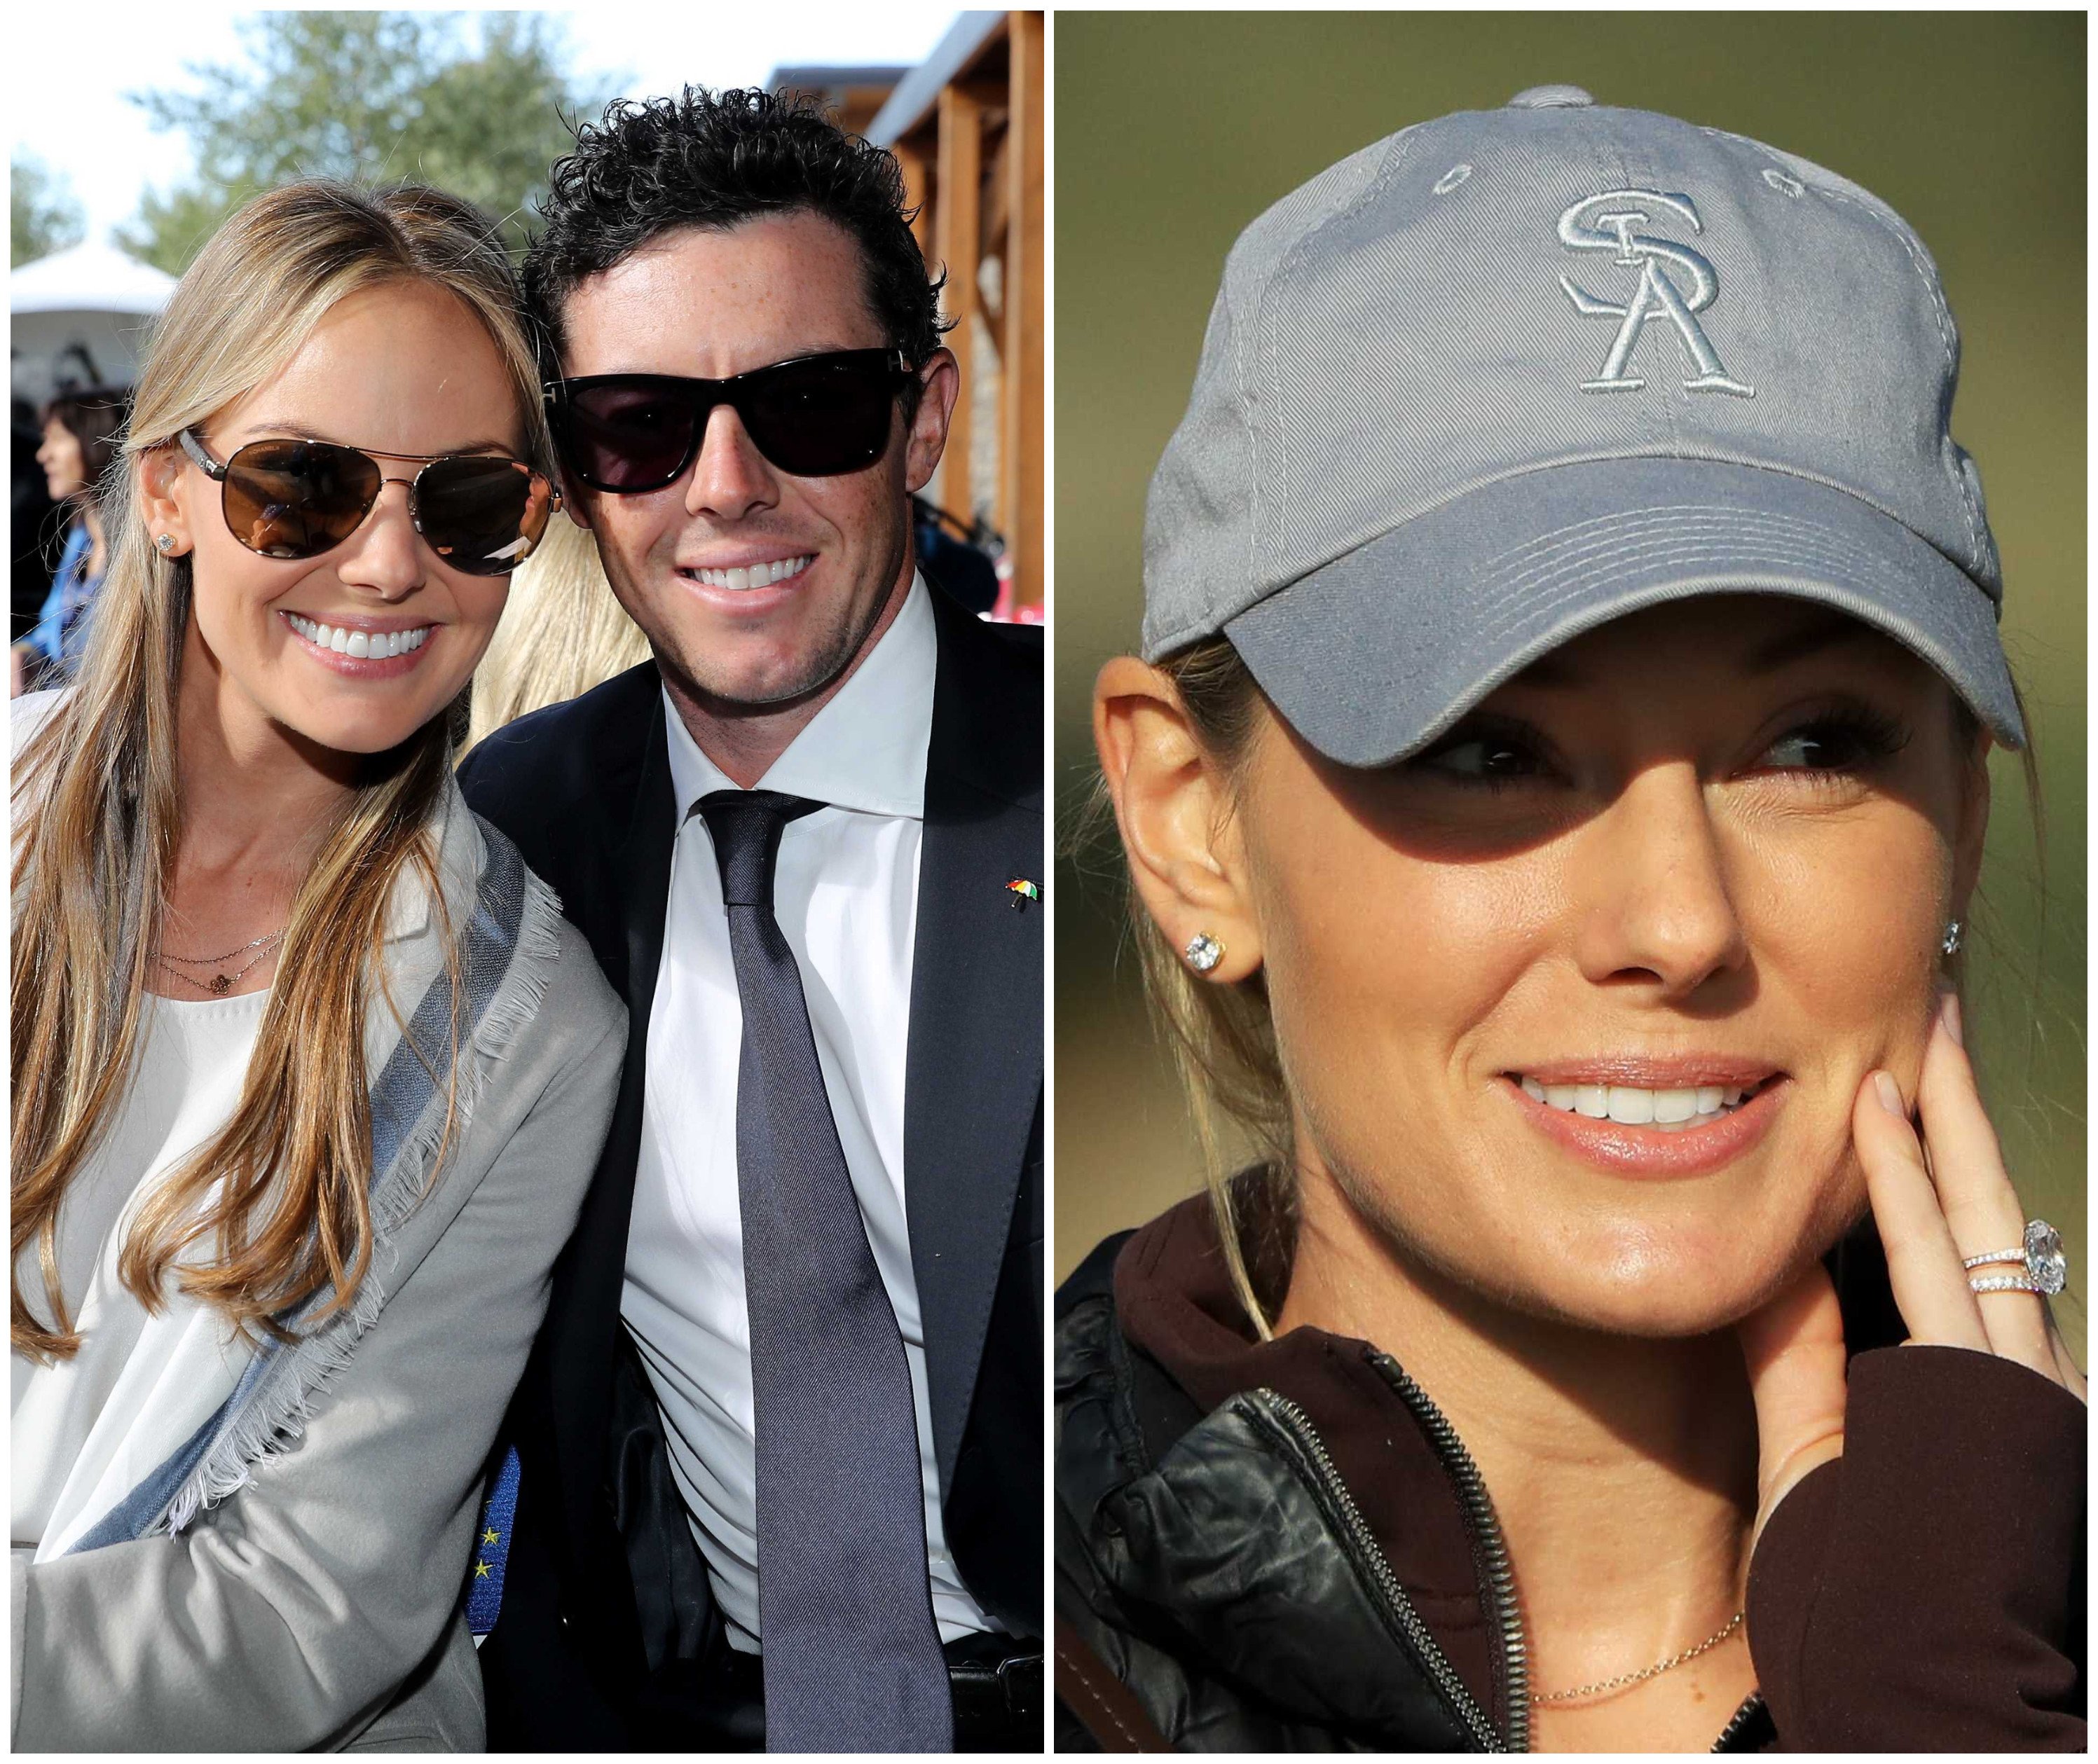 Erica Stoll was working for the PGA when she first met her husband Rory McIlroy; now the pair are getting a divorce. Photos: Getty Images